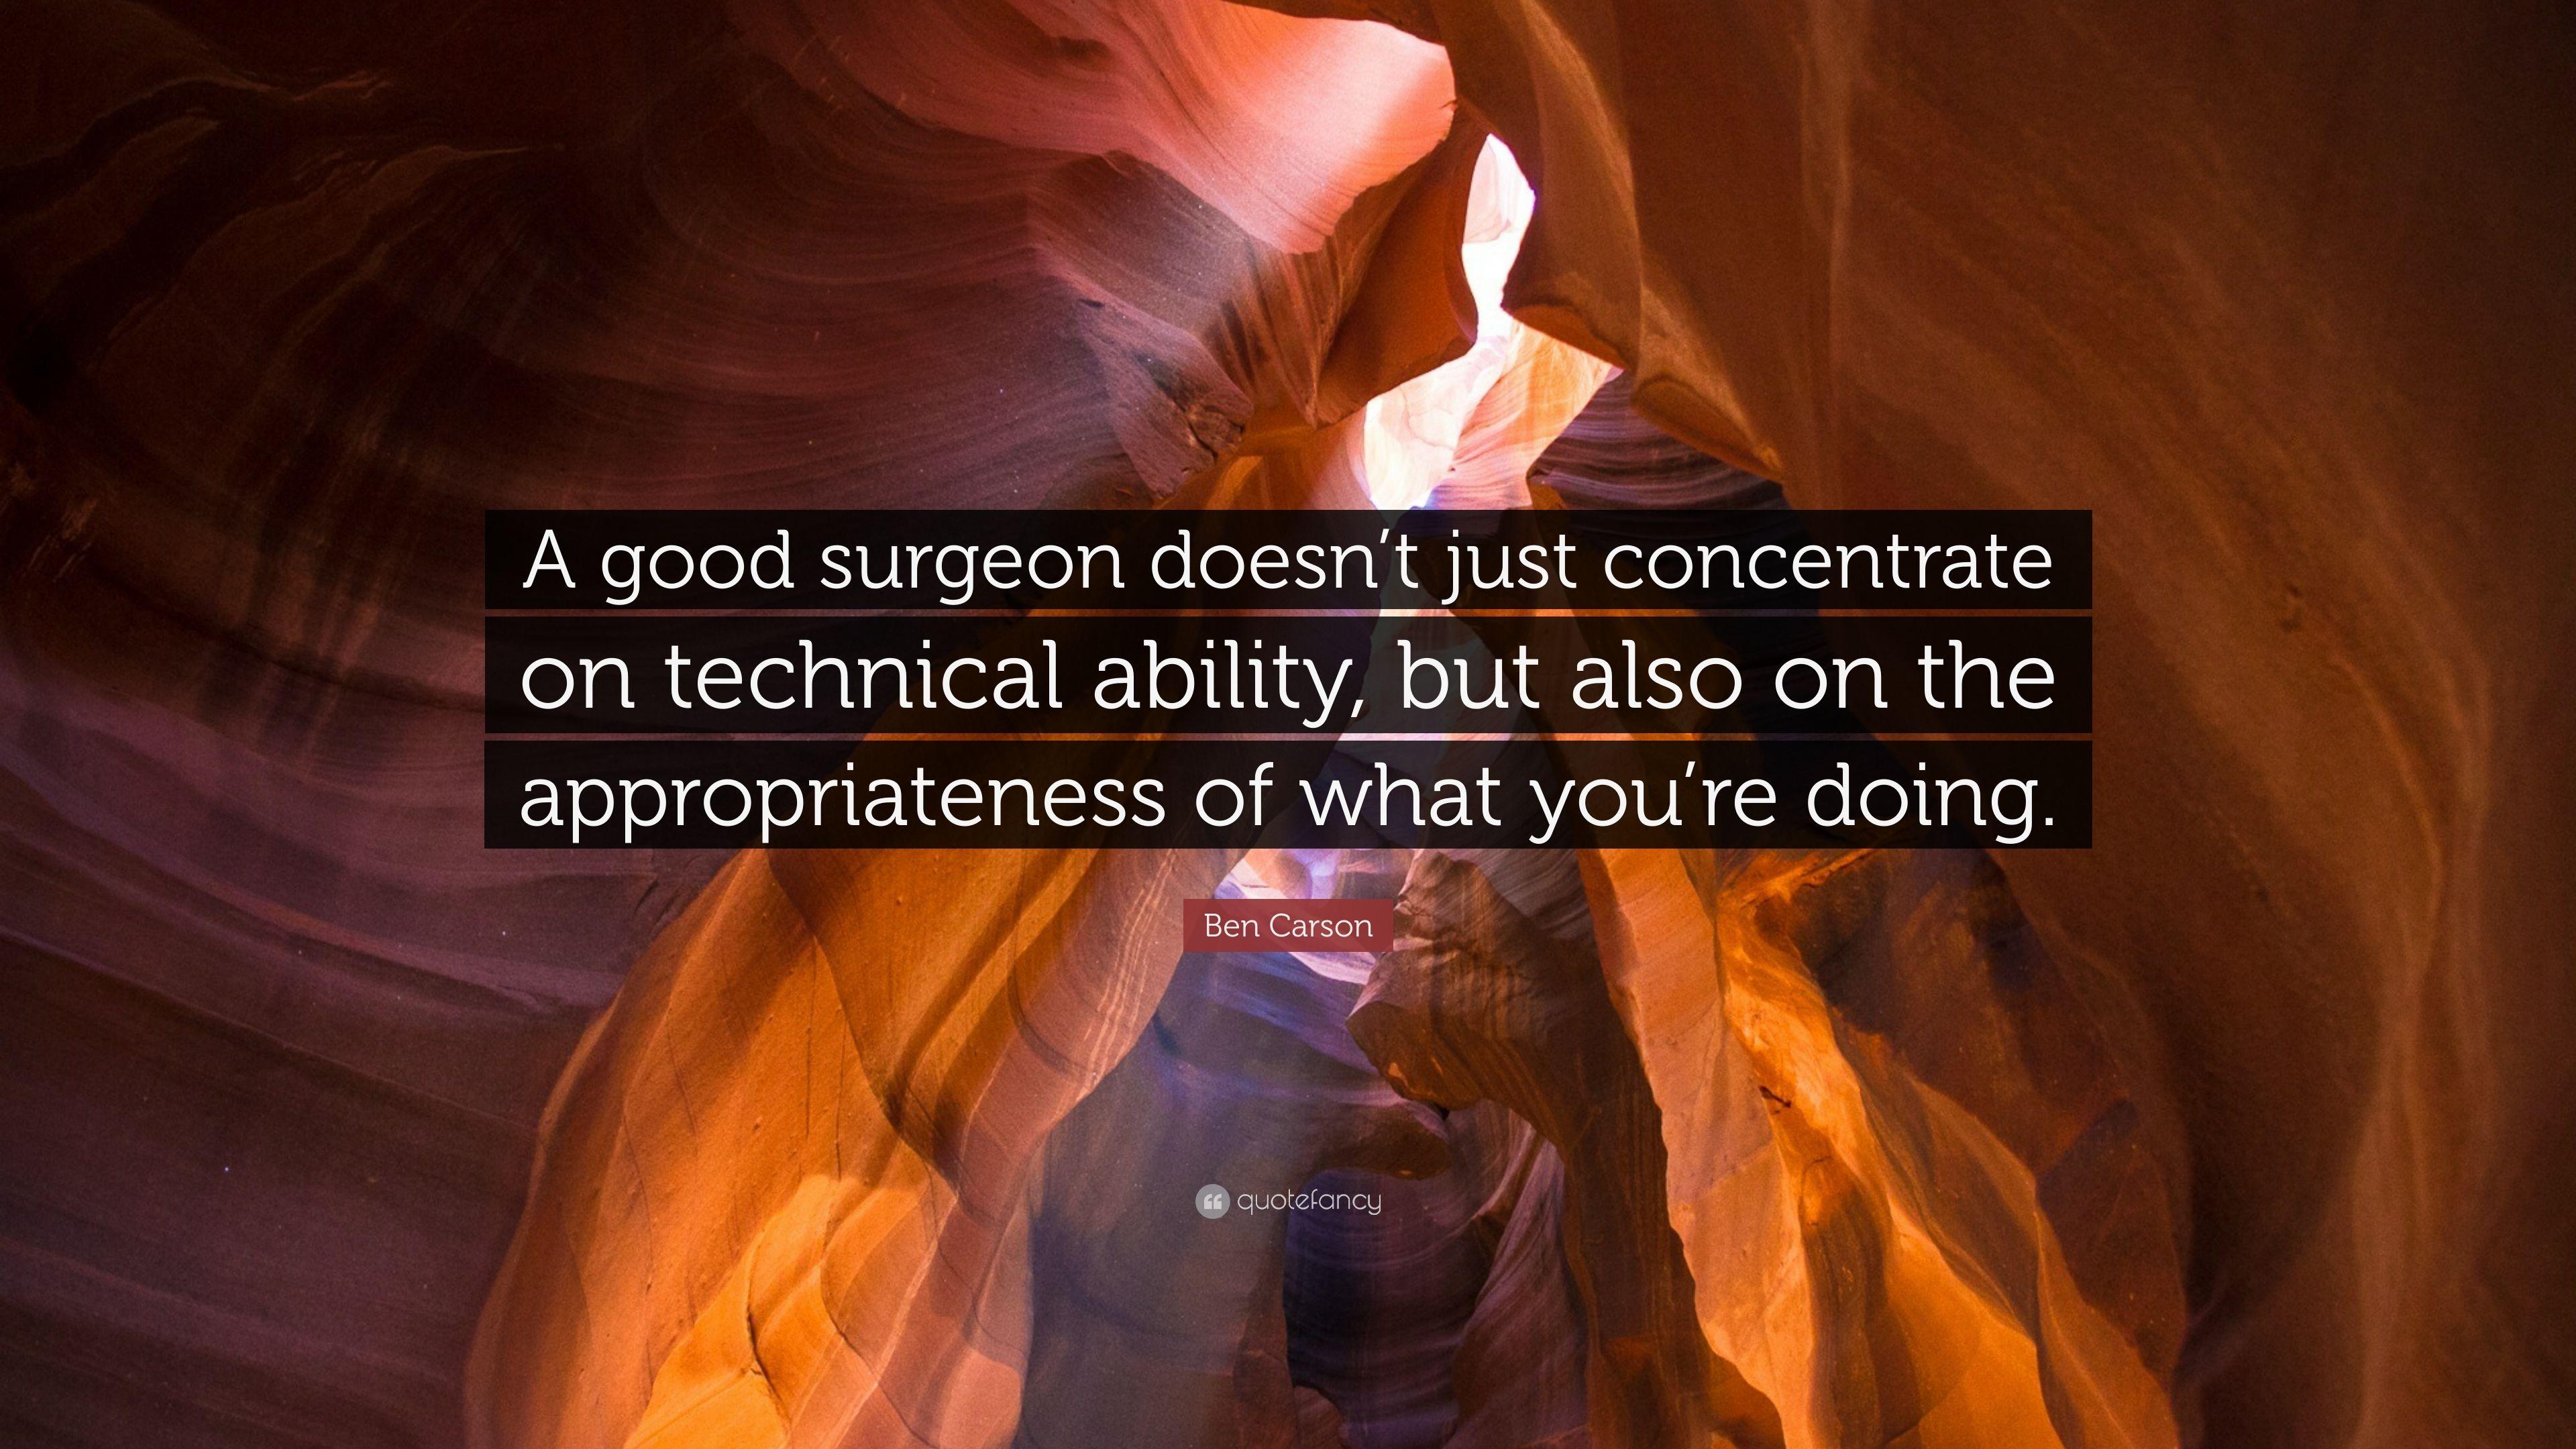 Ben Carson Quote: “A good surgeon doesn't just concentrate